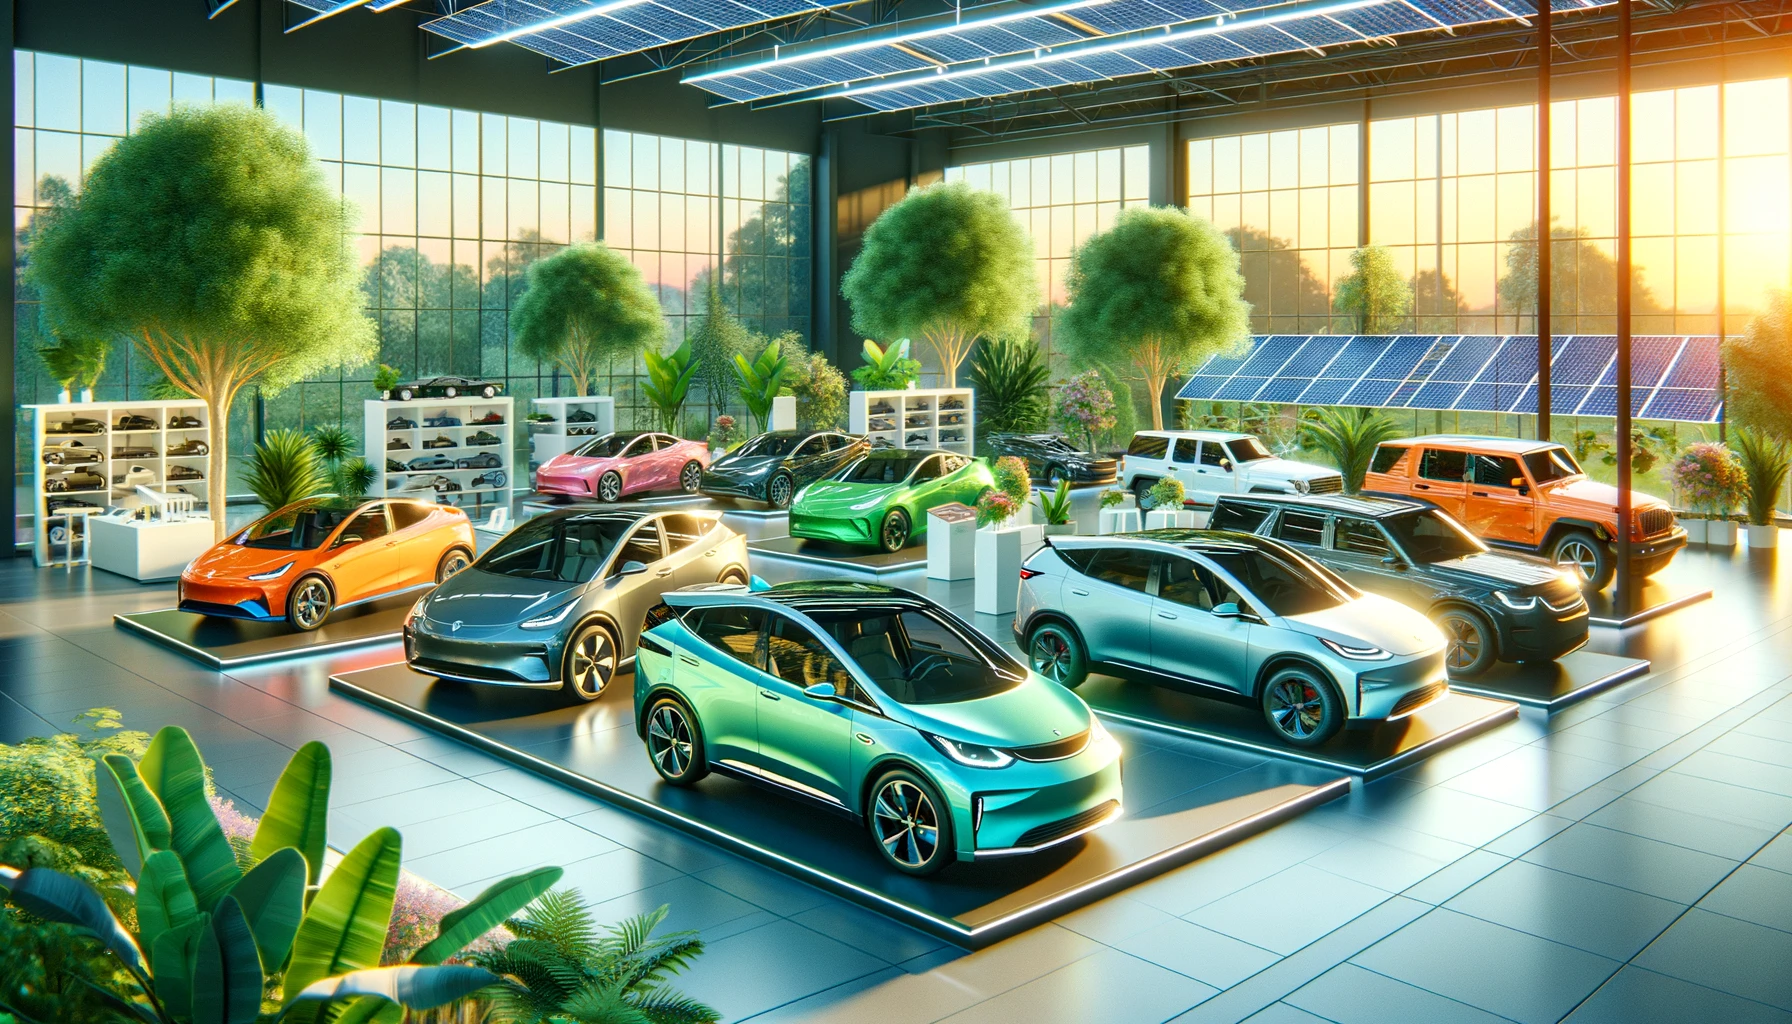 A vibrant and engaging image depicting a diverse range of used electric vehicles